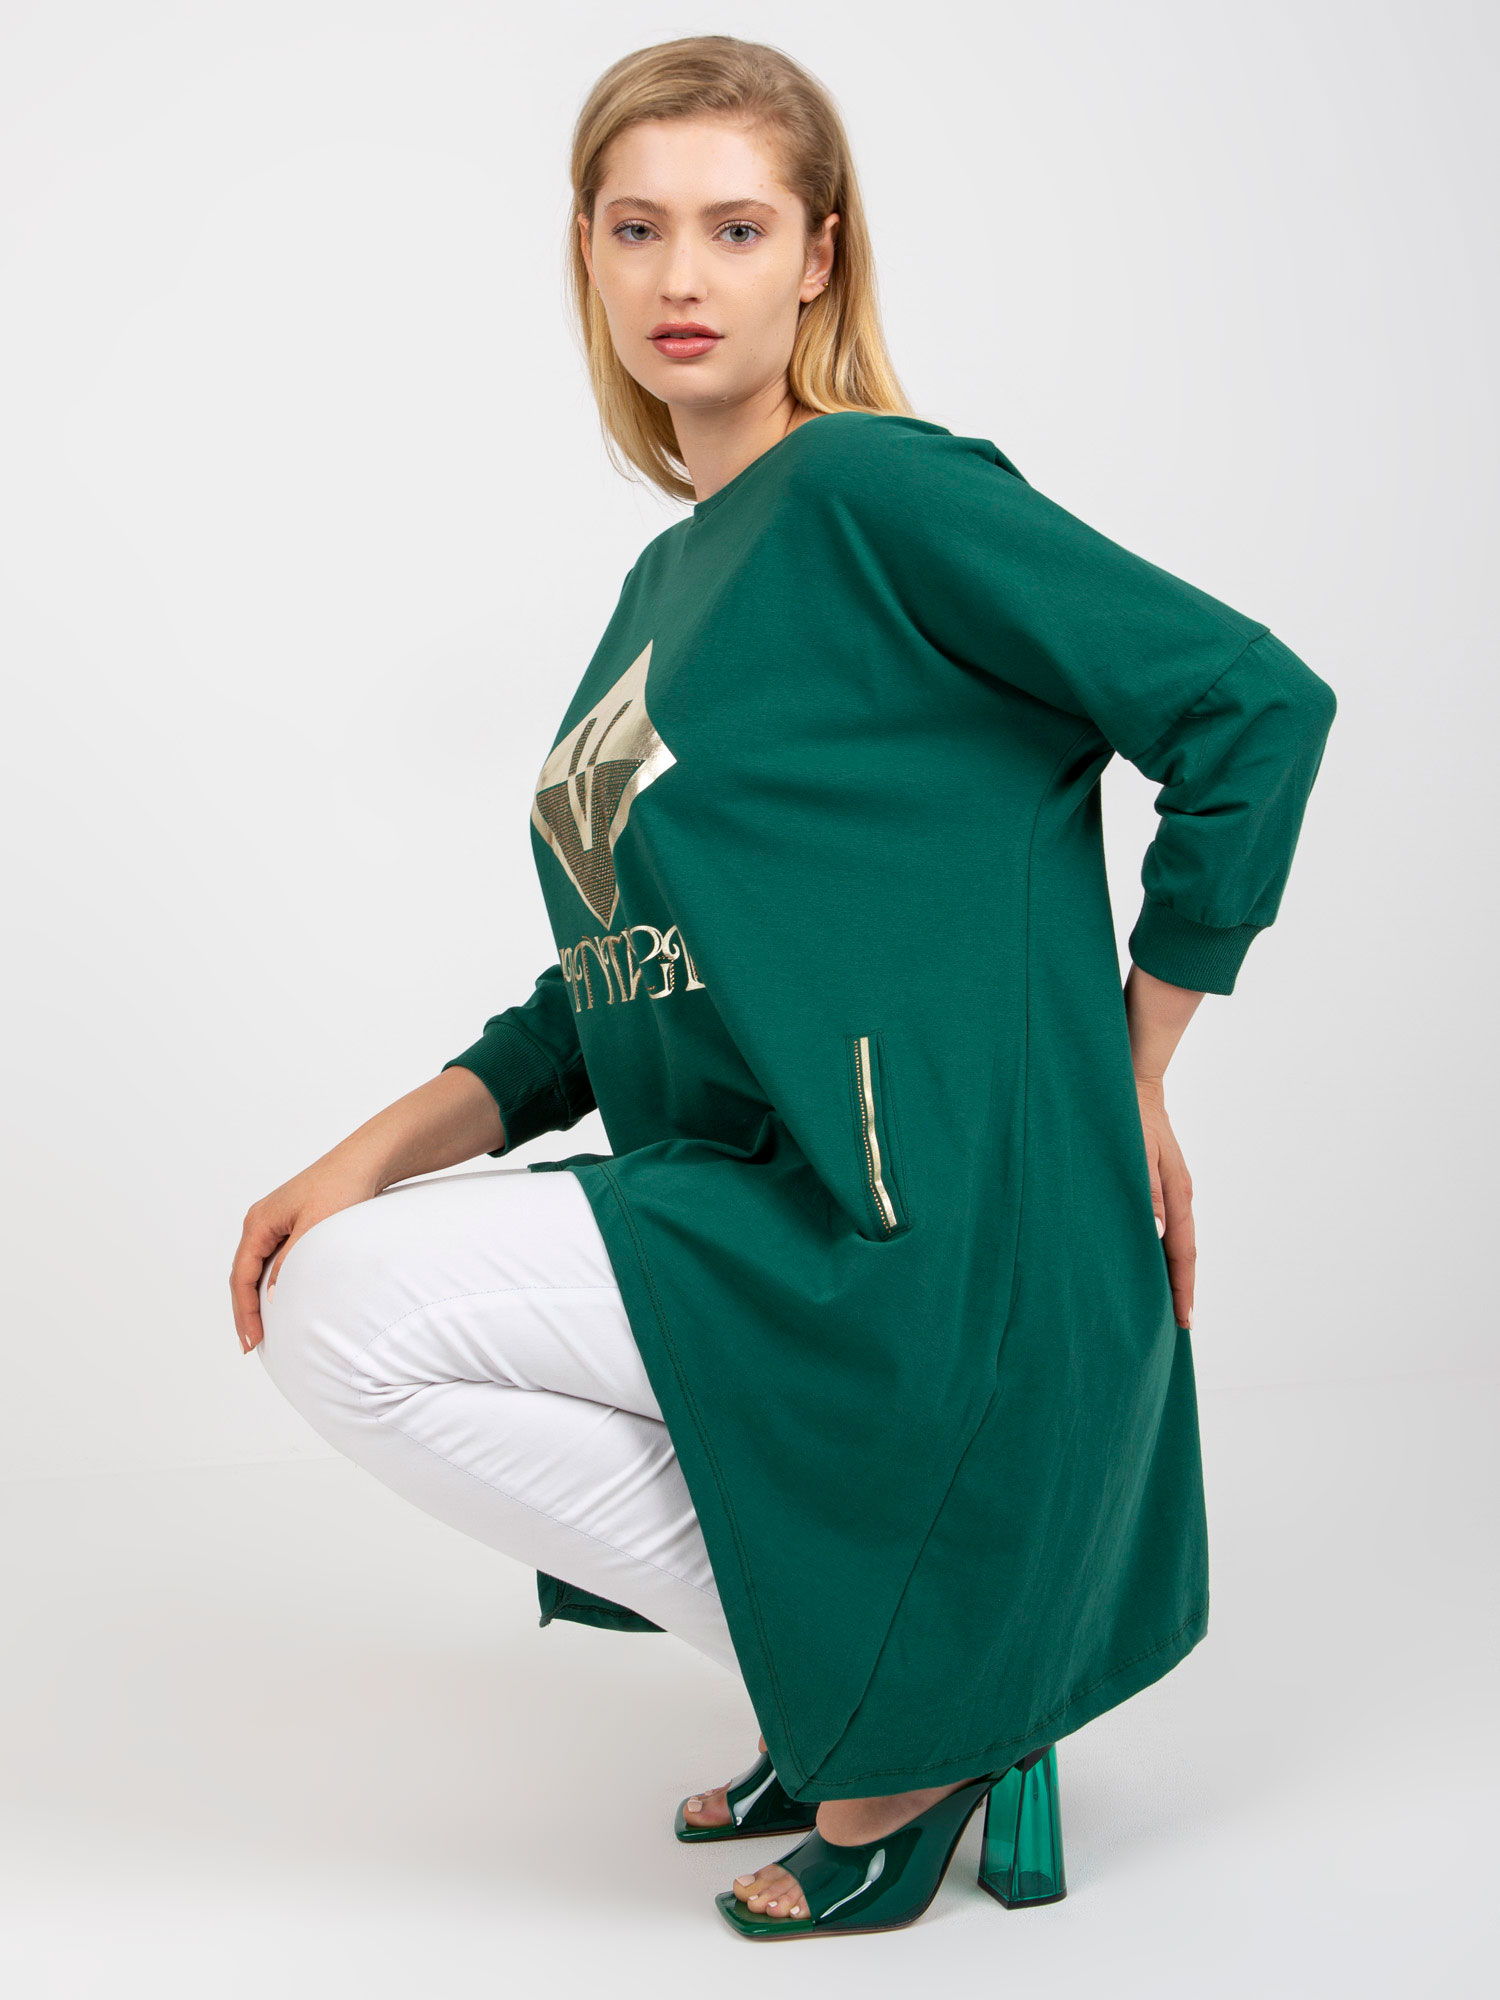 Dark Green Blouse Plus Size With Gold Print